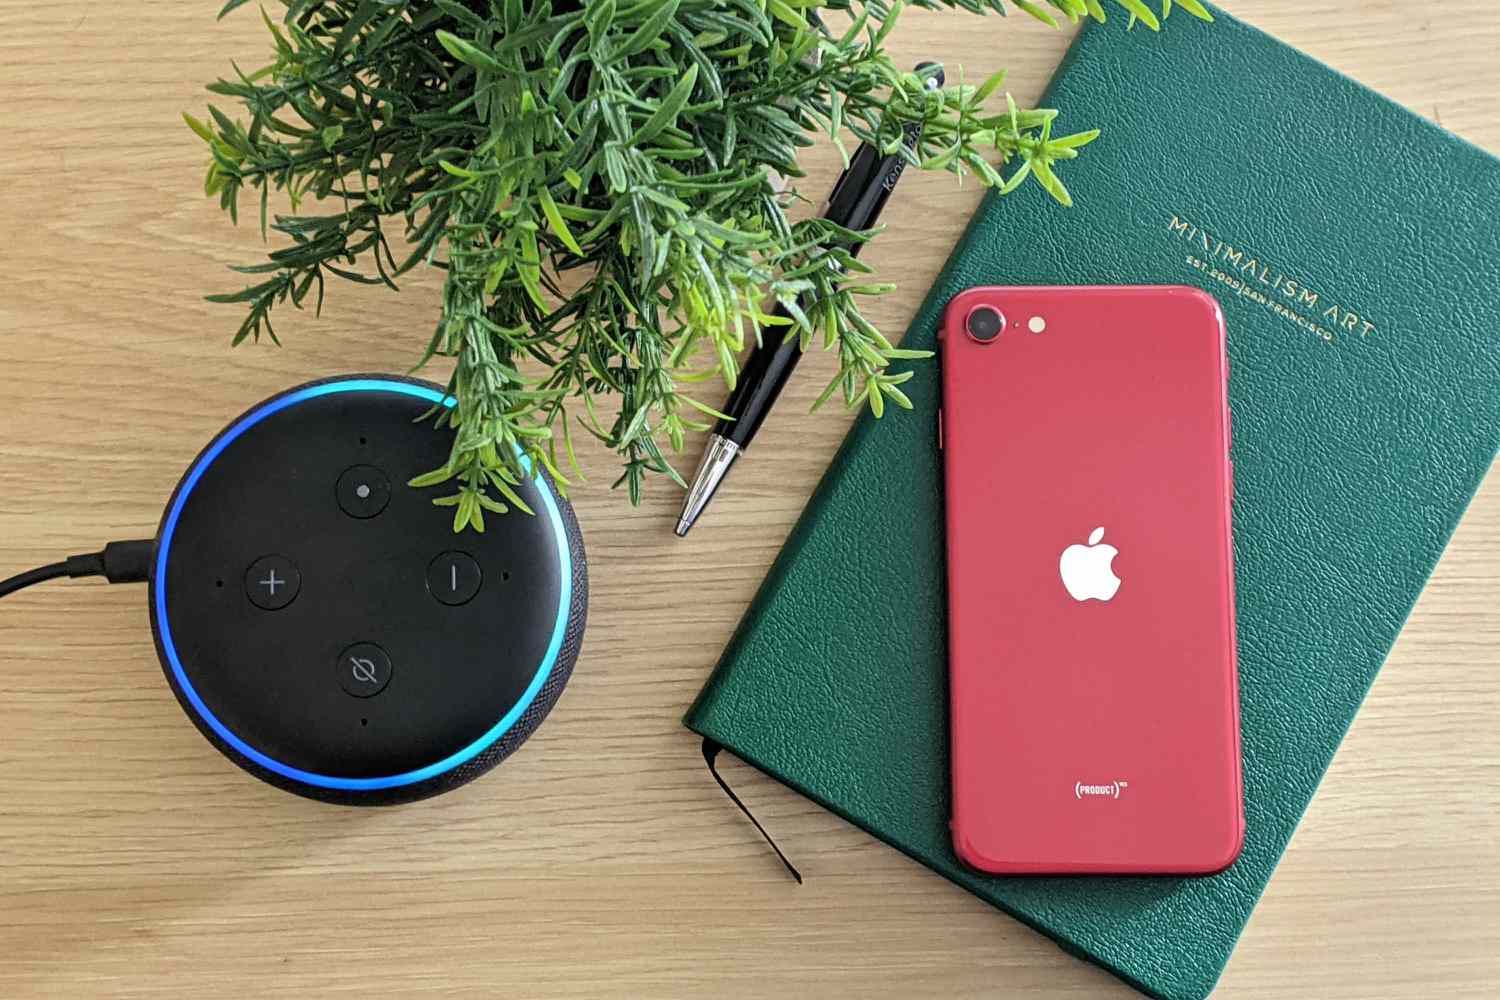 Linking Alexa To IPhone Hotspot: A Step-by-Step Guide